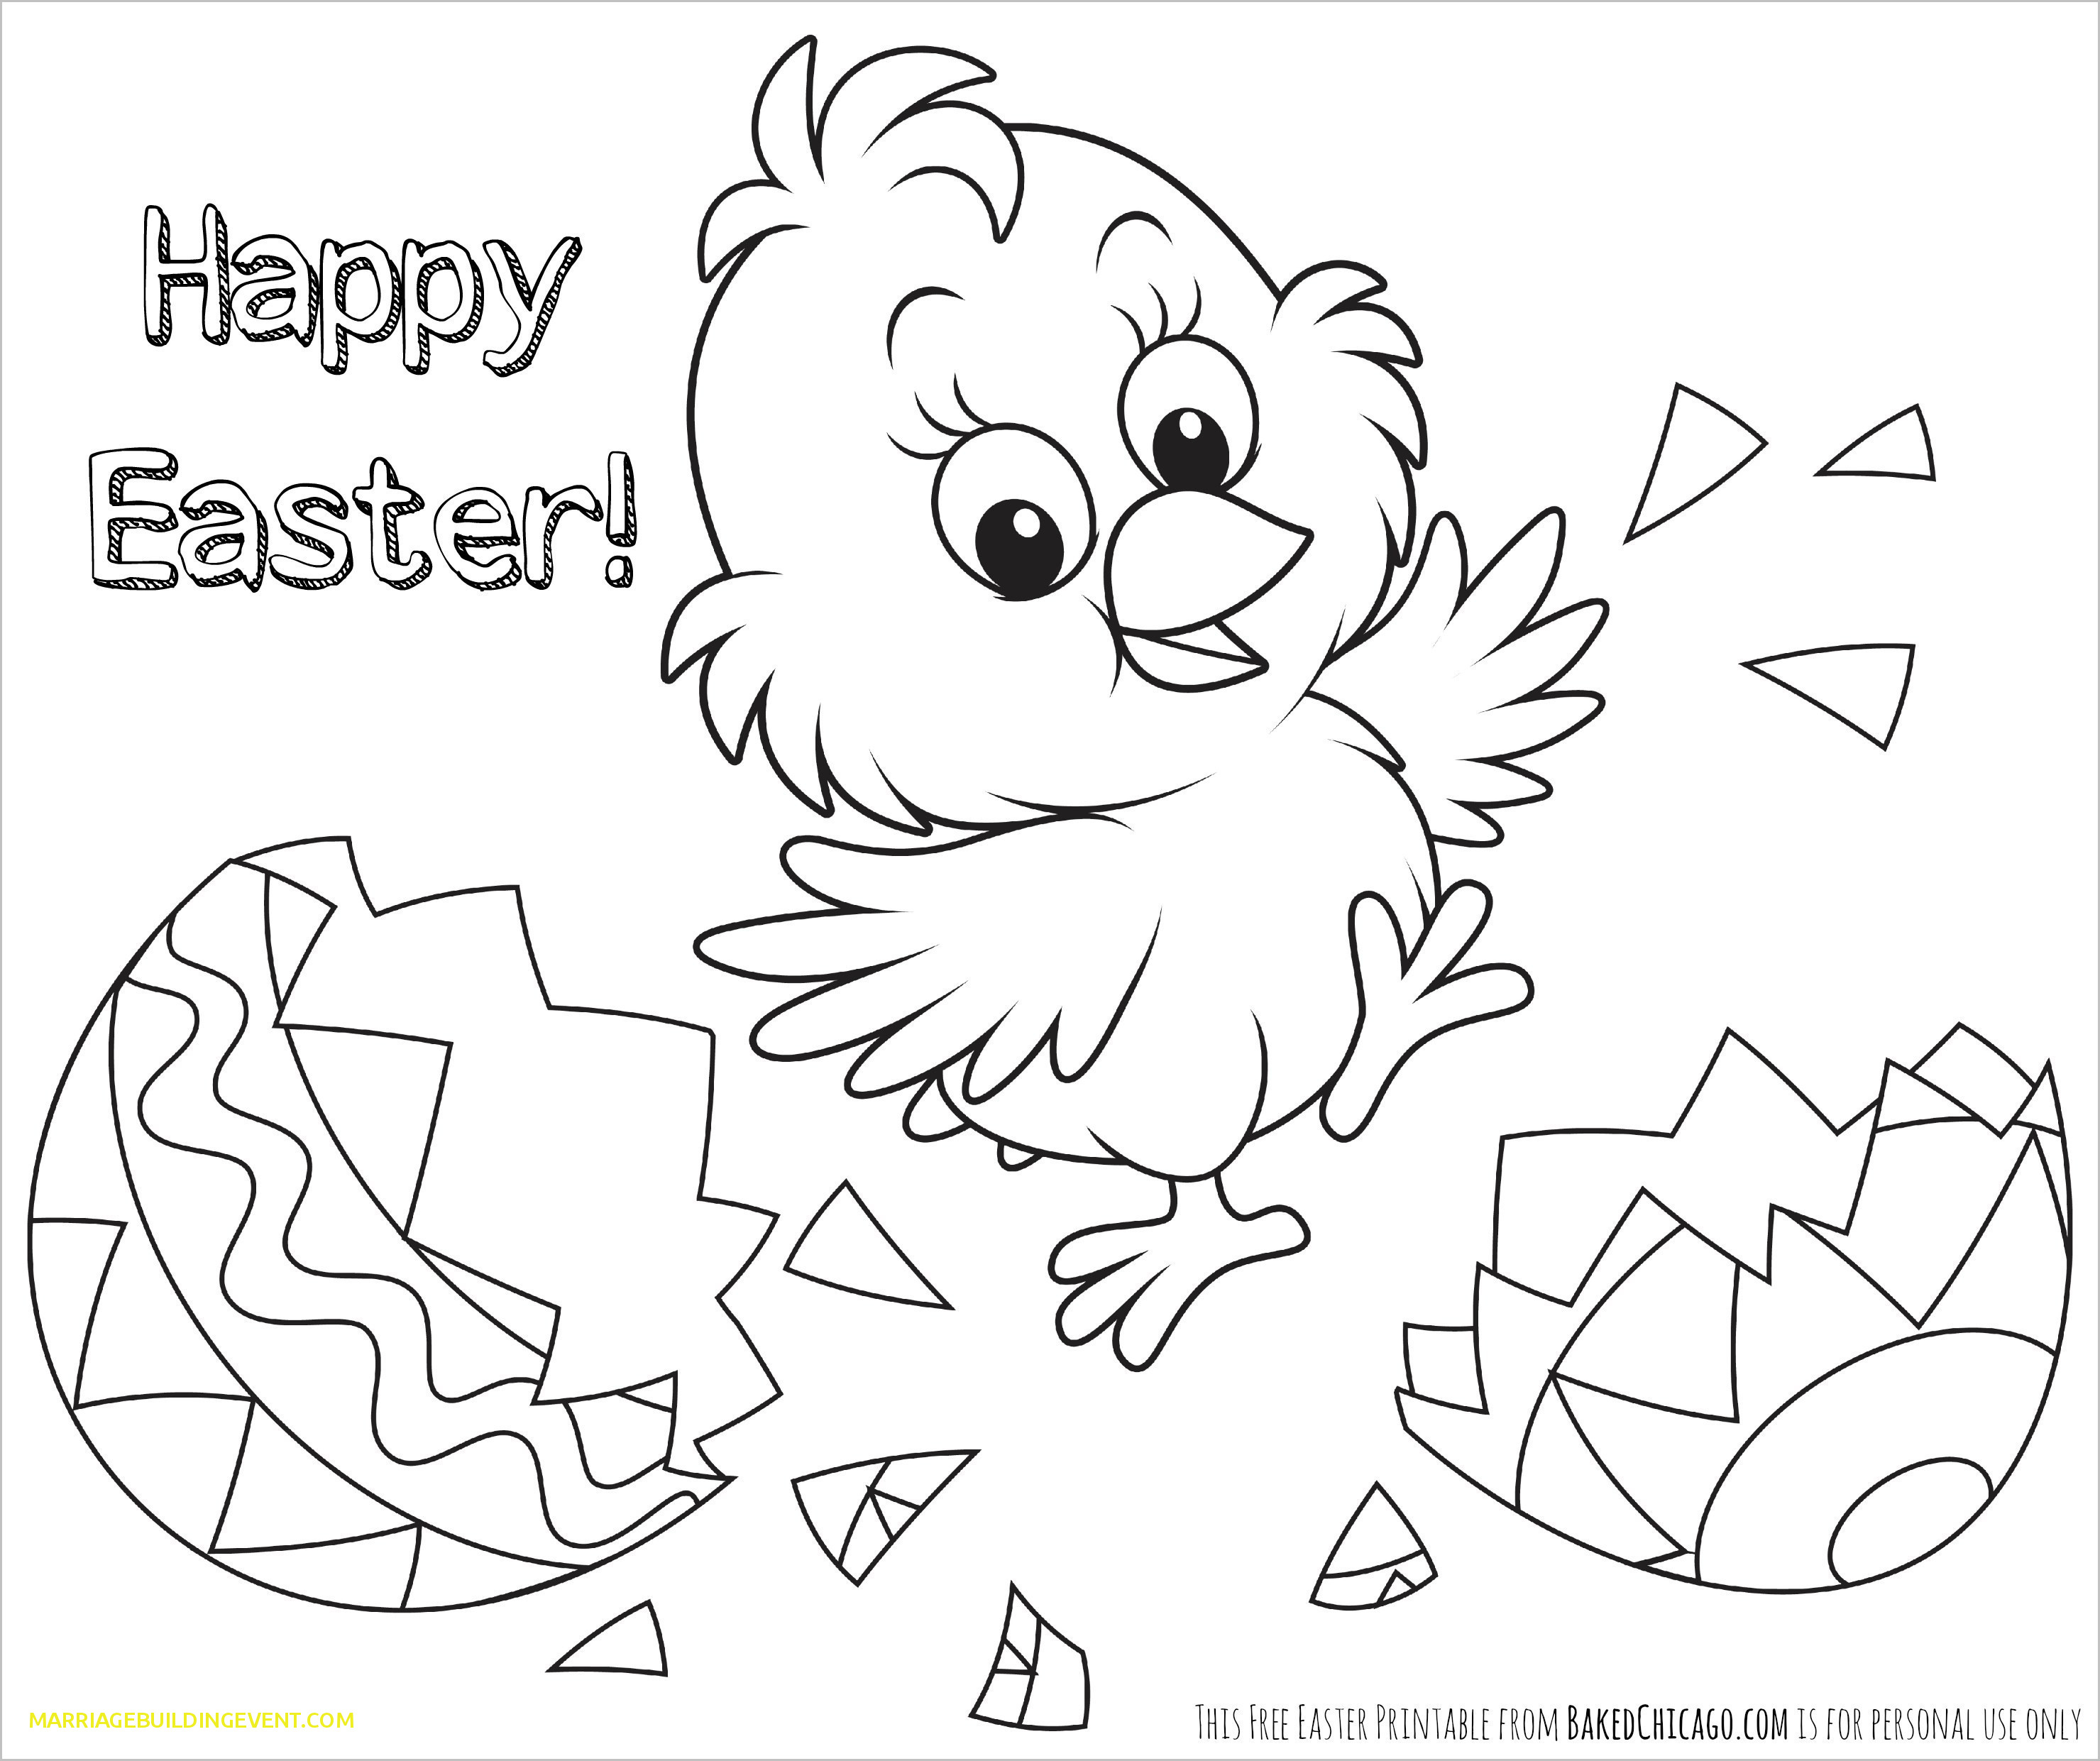 Beau Easter Coloring Pages For Kids To Print | Marriagebuildingevent - Coloring Pages Free Printable Easter